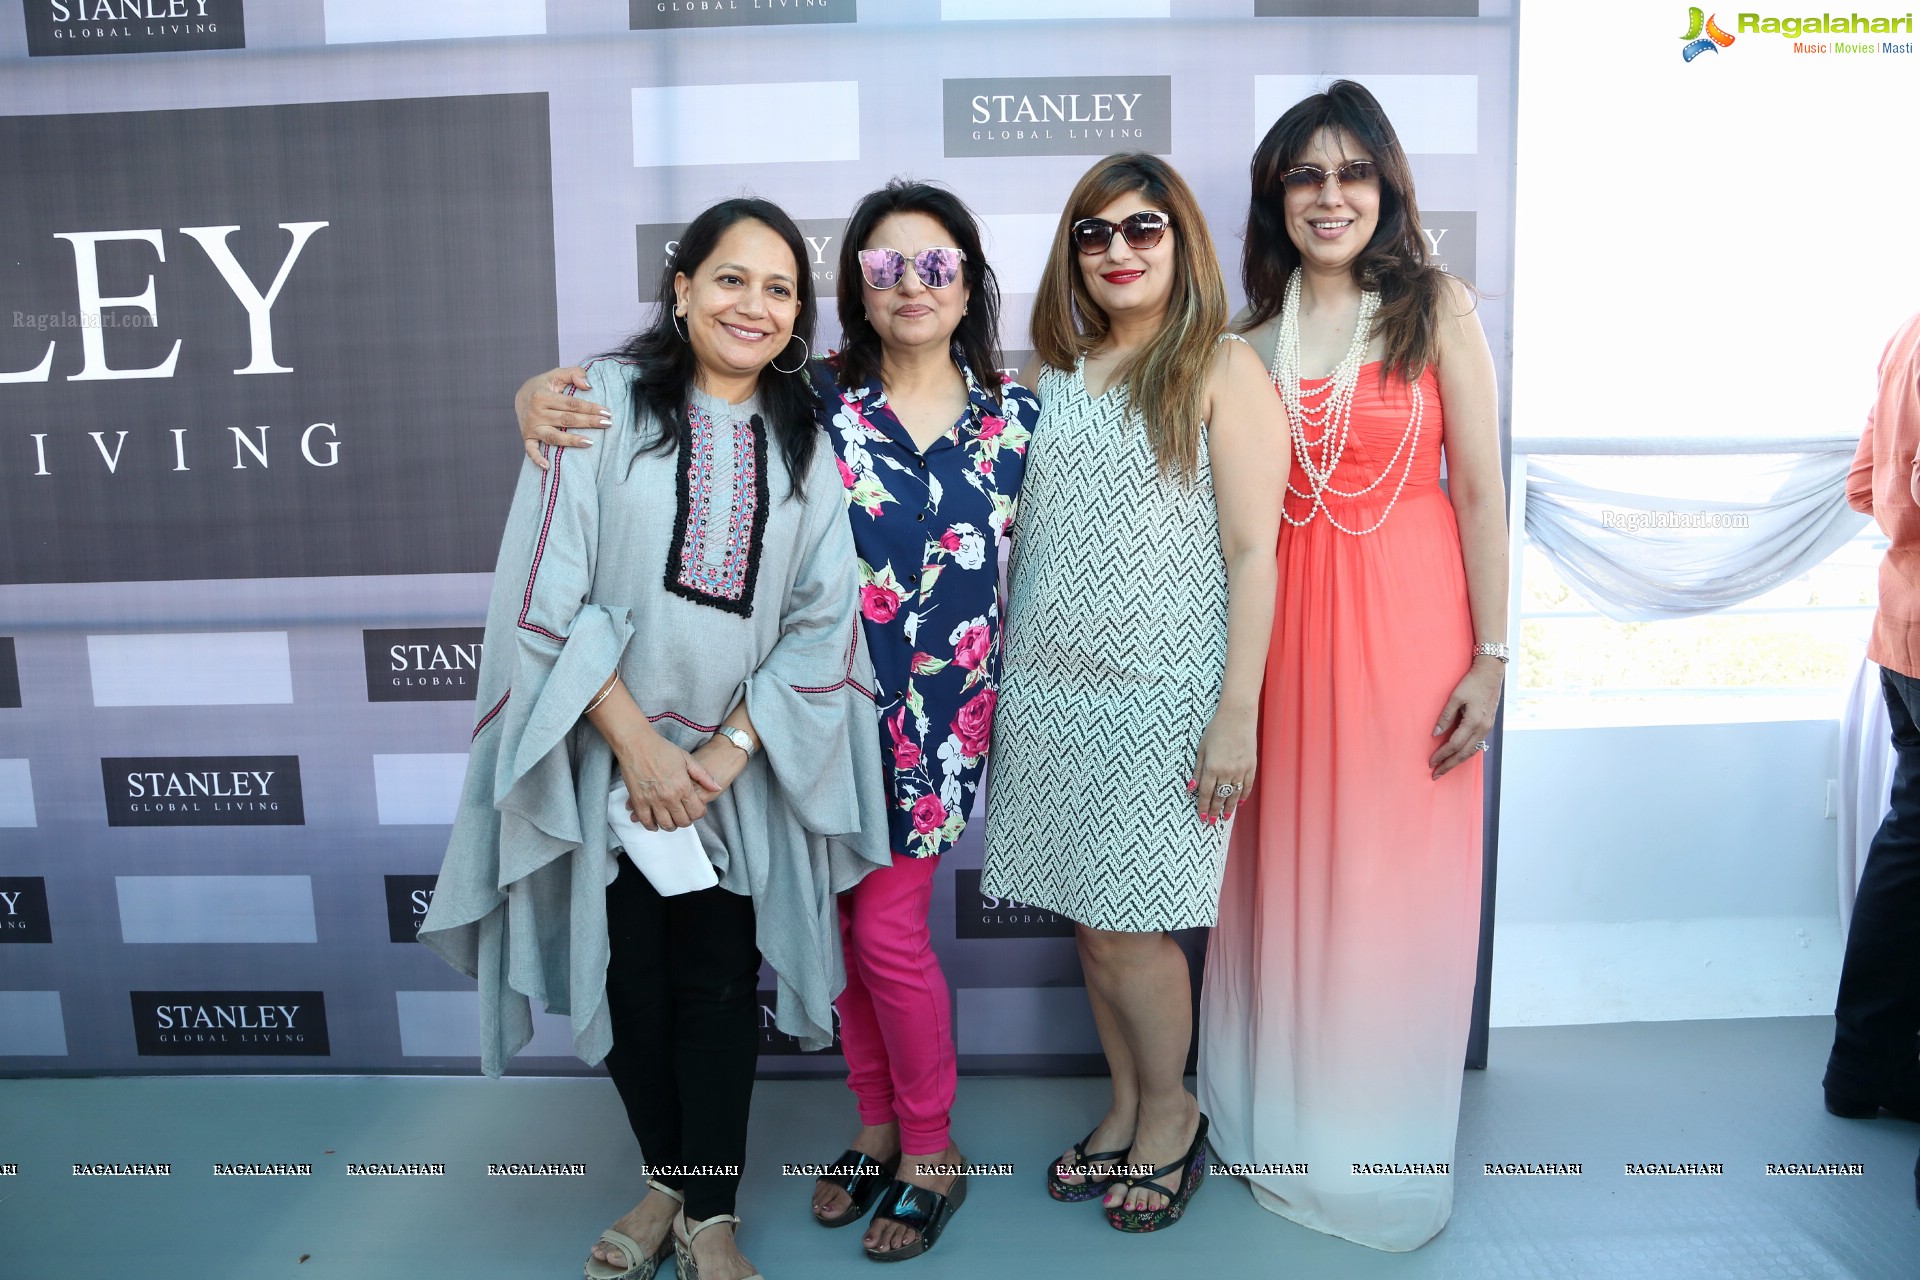 Grand Launch of Stanley Global Living, Jubilee Hills